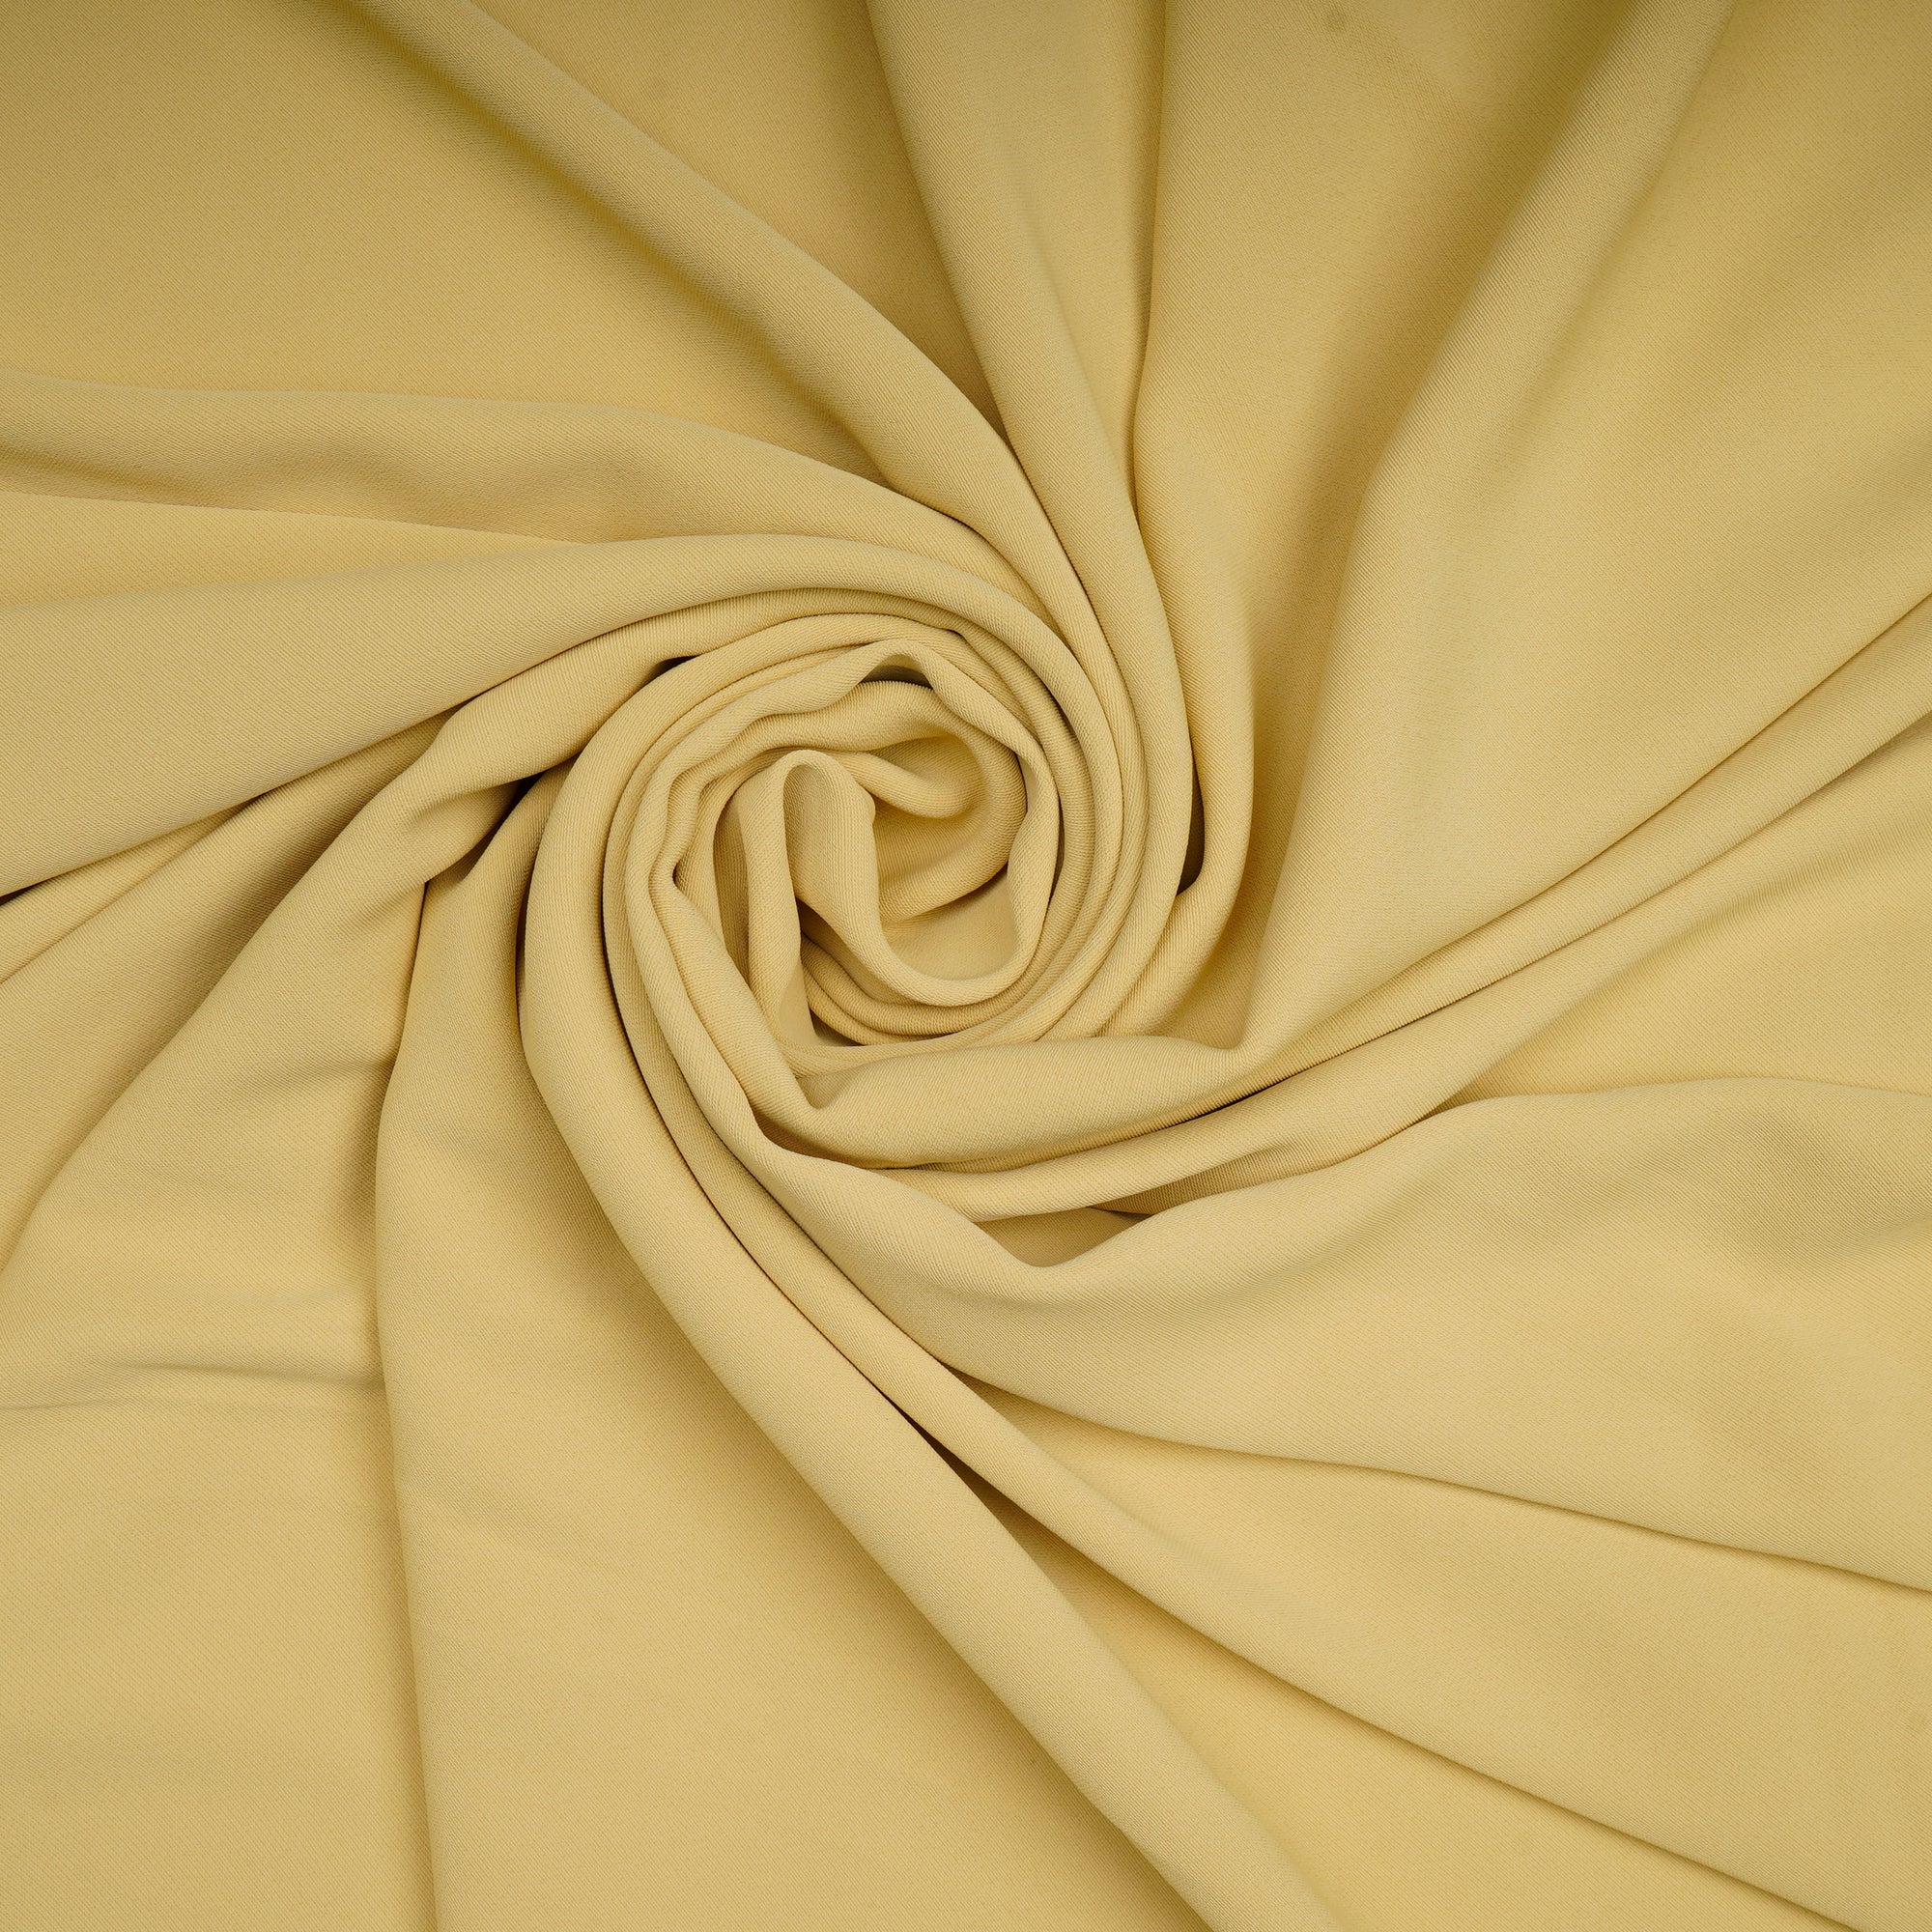 Pastel Yellow Solid Dyed Imported Mesh Twill Satin Fabric (60" Width)